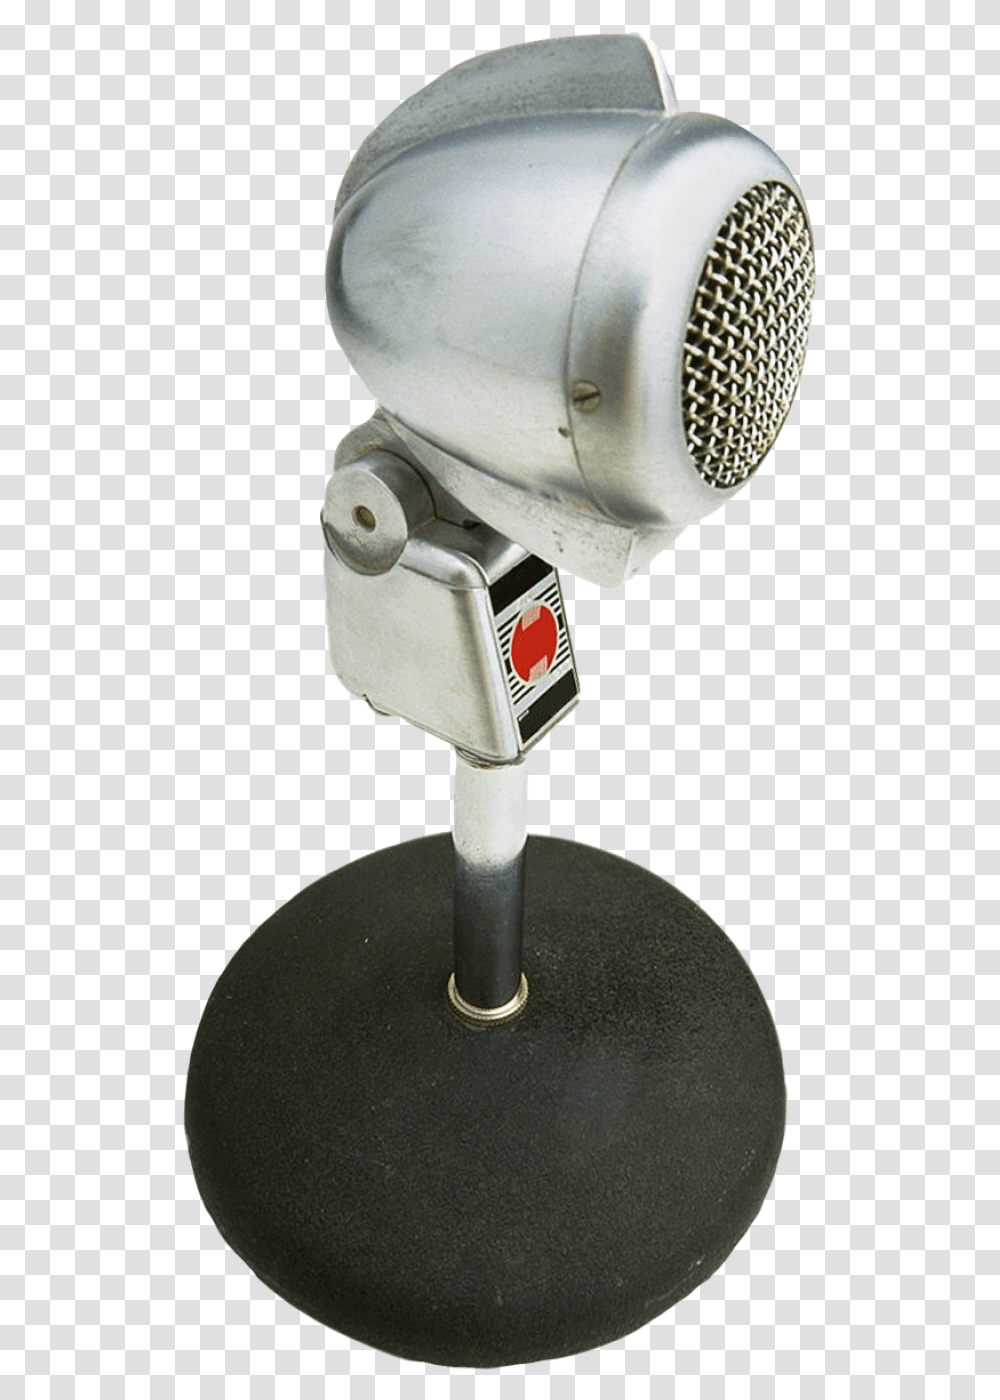 Mic Image Portable Network Graphics, Electrical Device, Microphone, Helmet Transparent Png